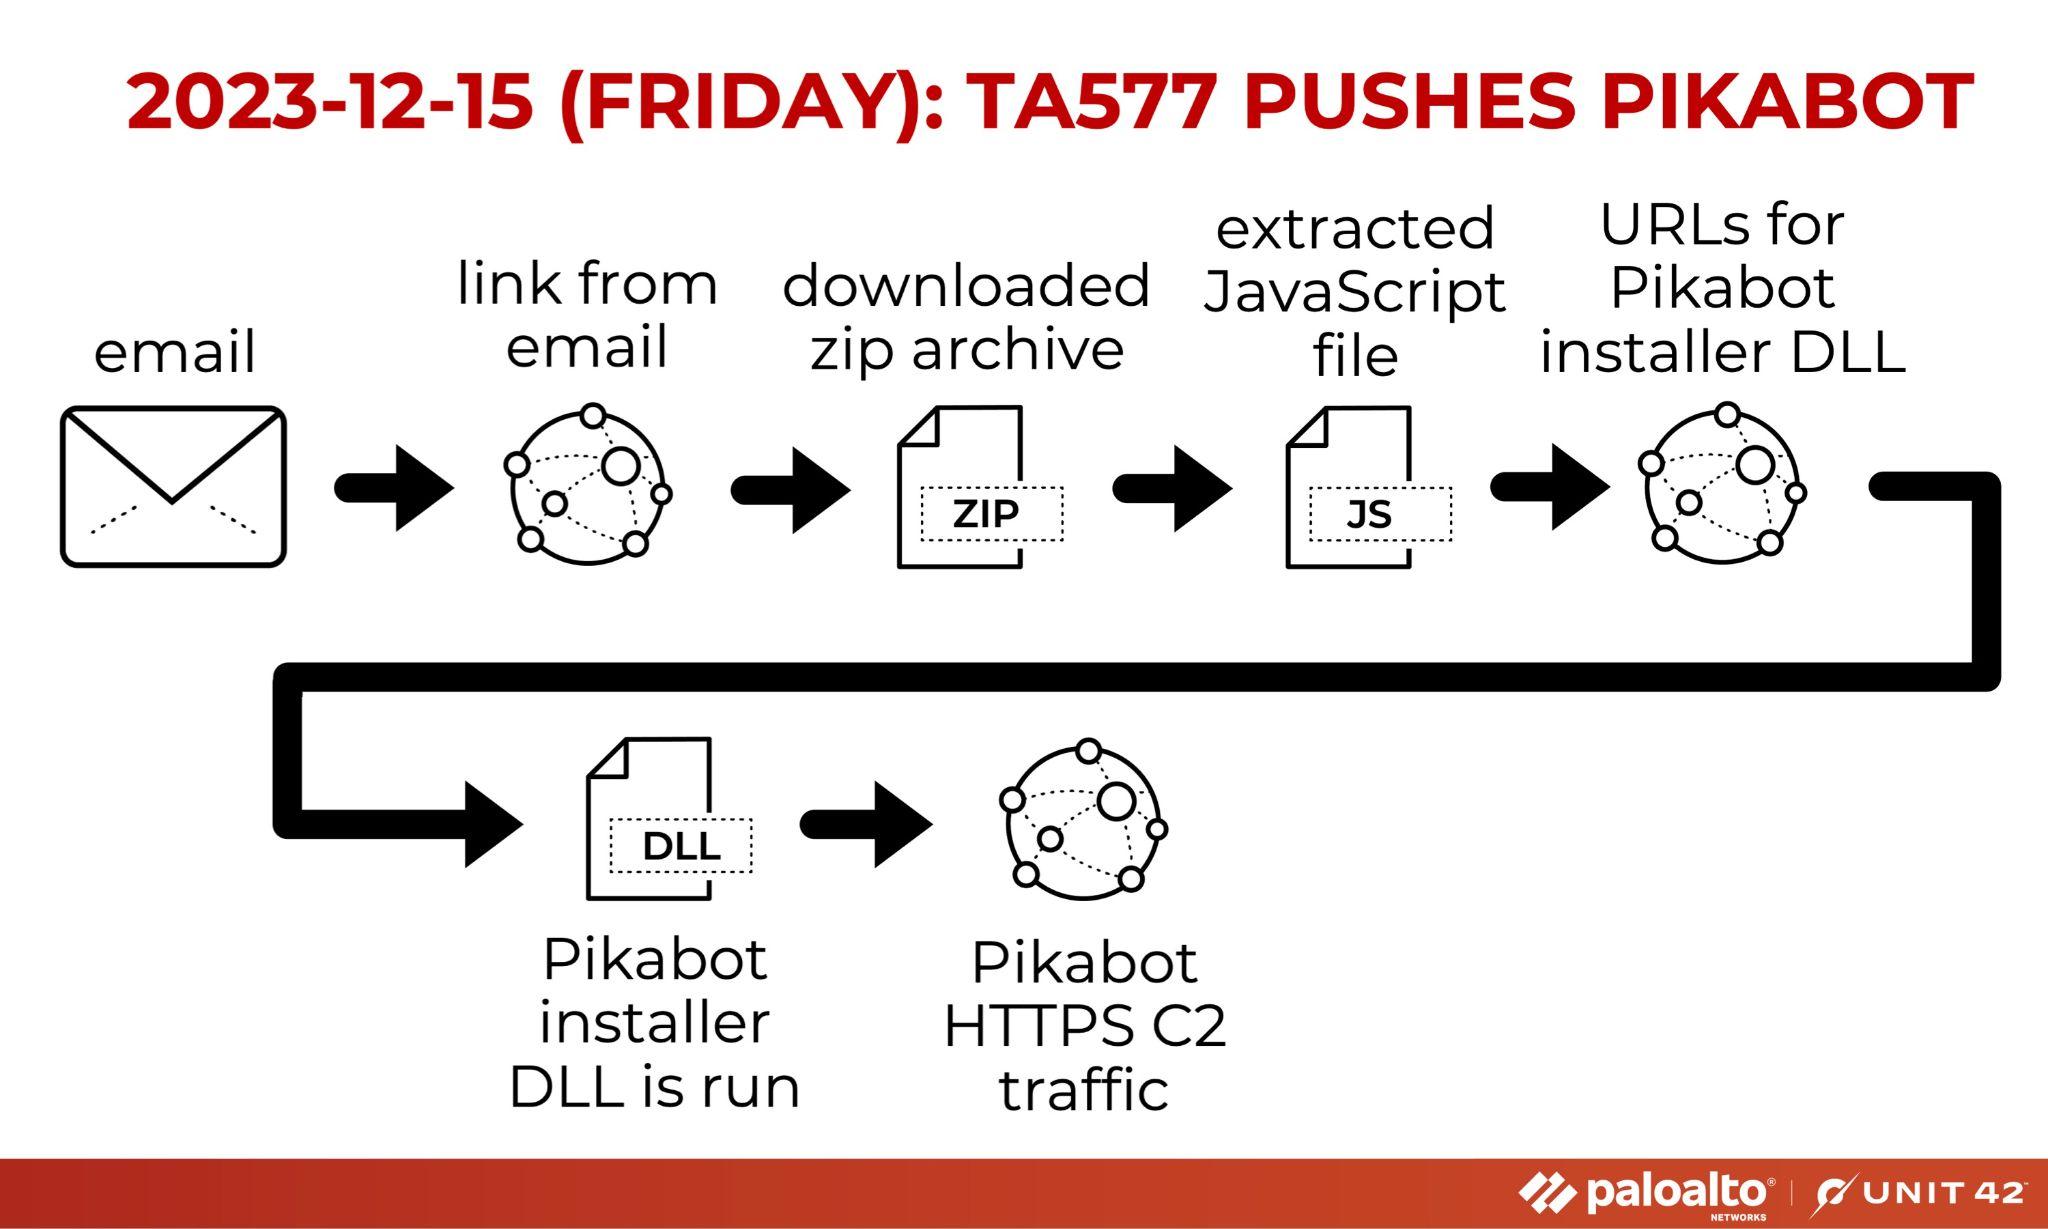 TA557 Pikabot infection chain: Email>link from email>downloaded .zip>extracted JavaScript file>URLs for Pikabot installer DLL>Pikabot installer DLL is run>Pikabot HTTPS C2 traffic